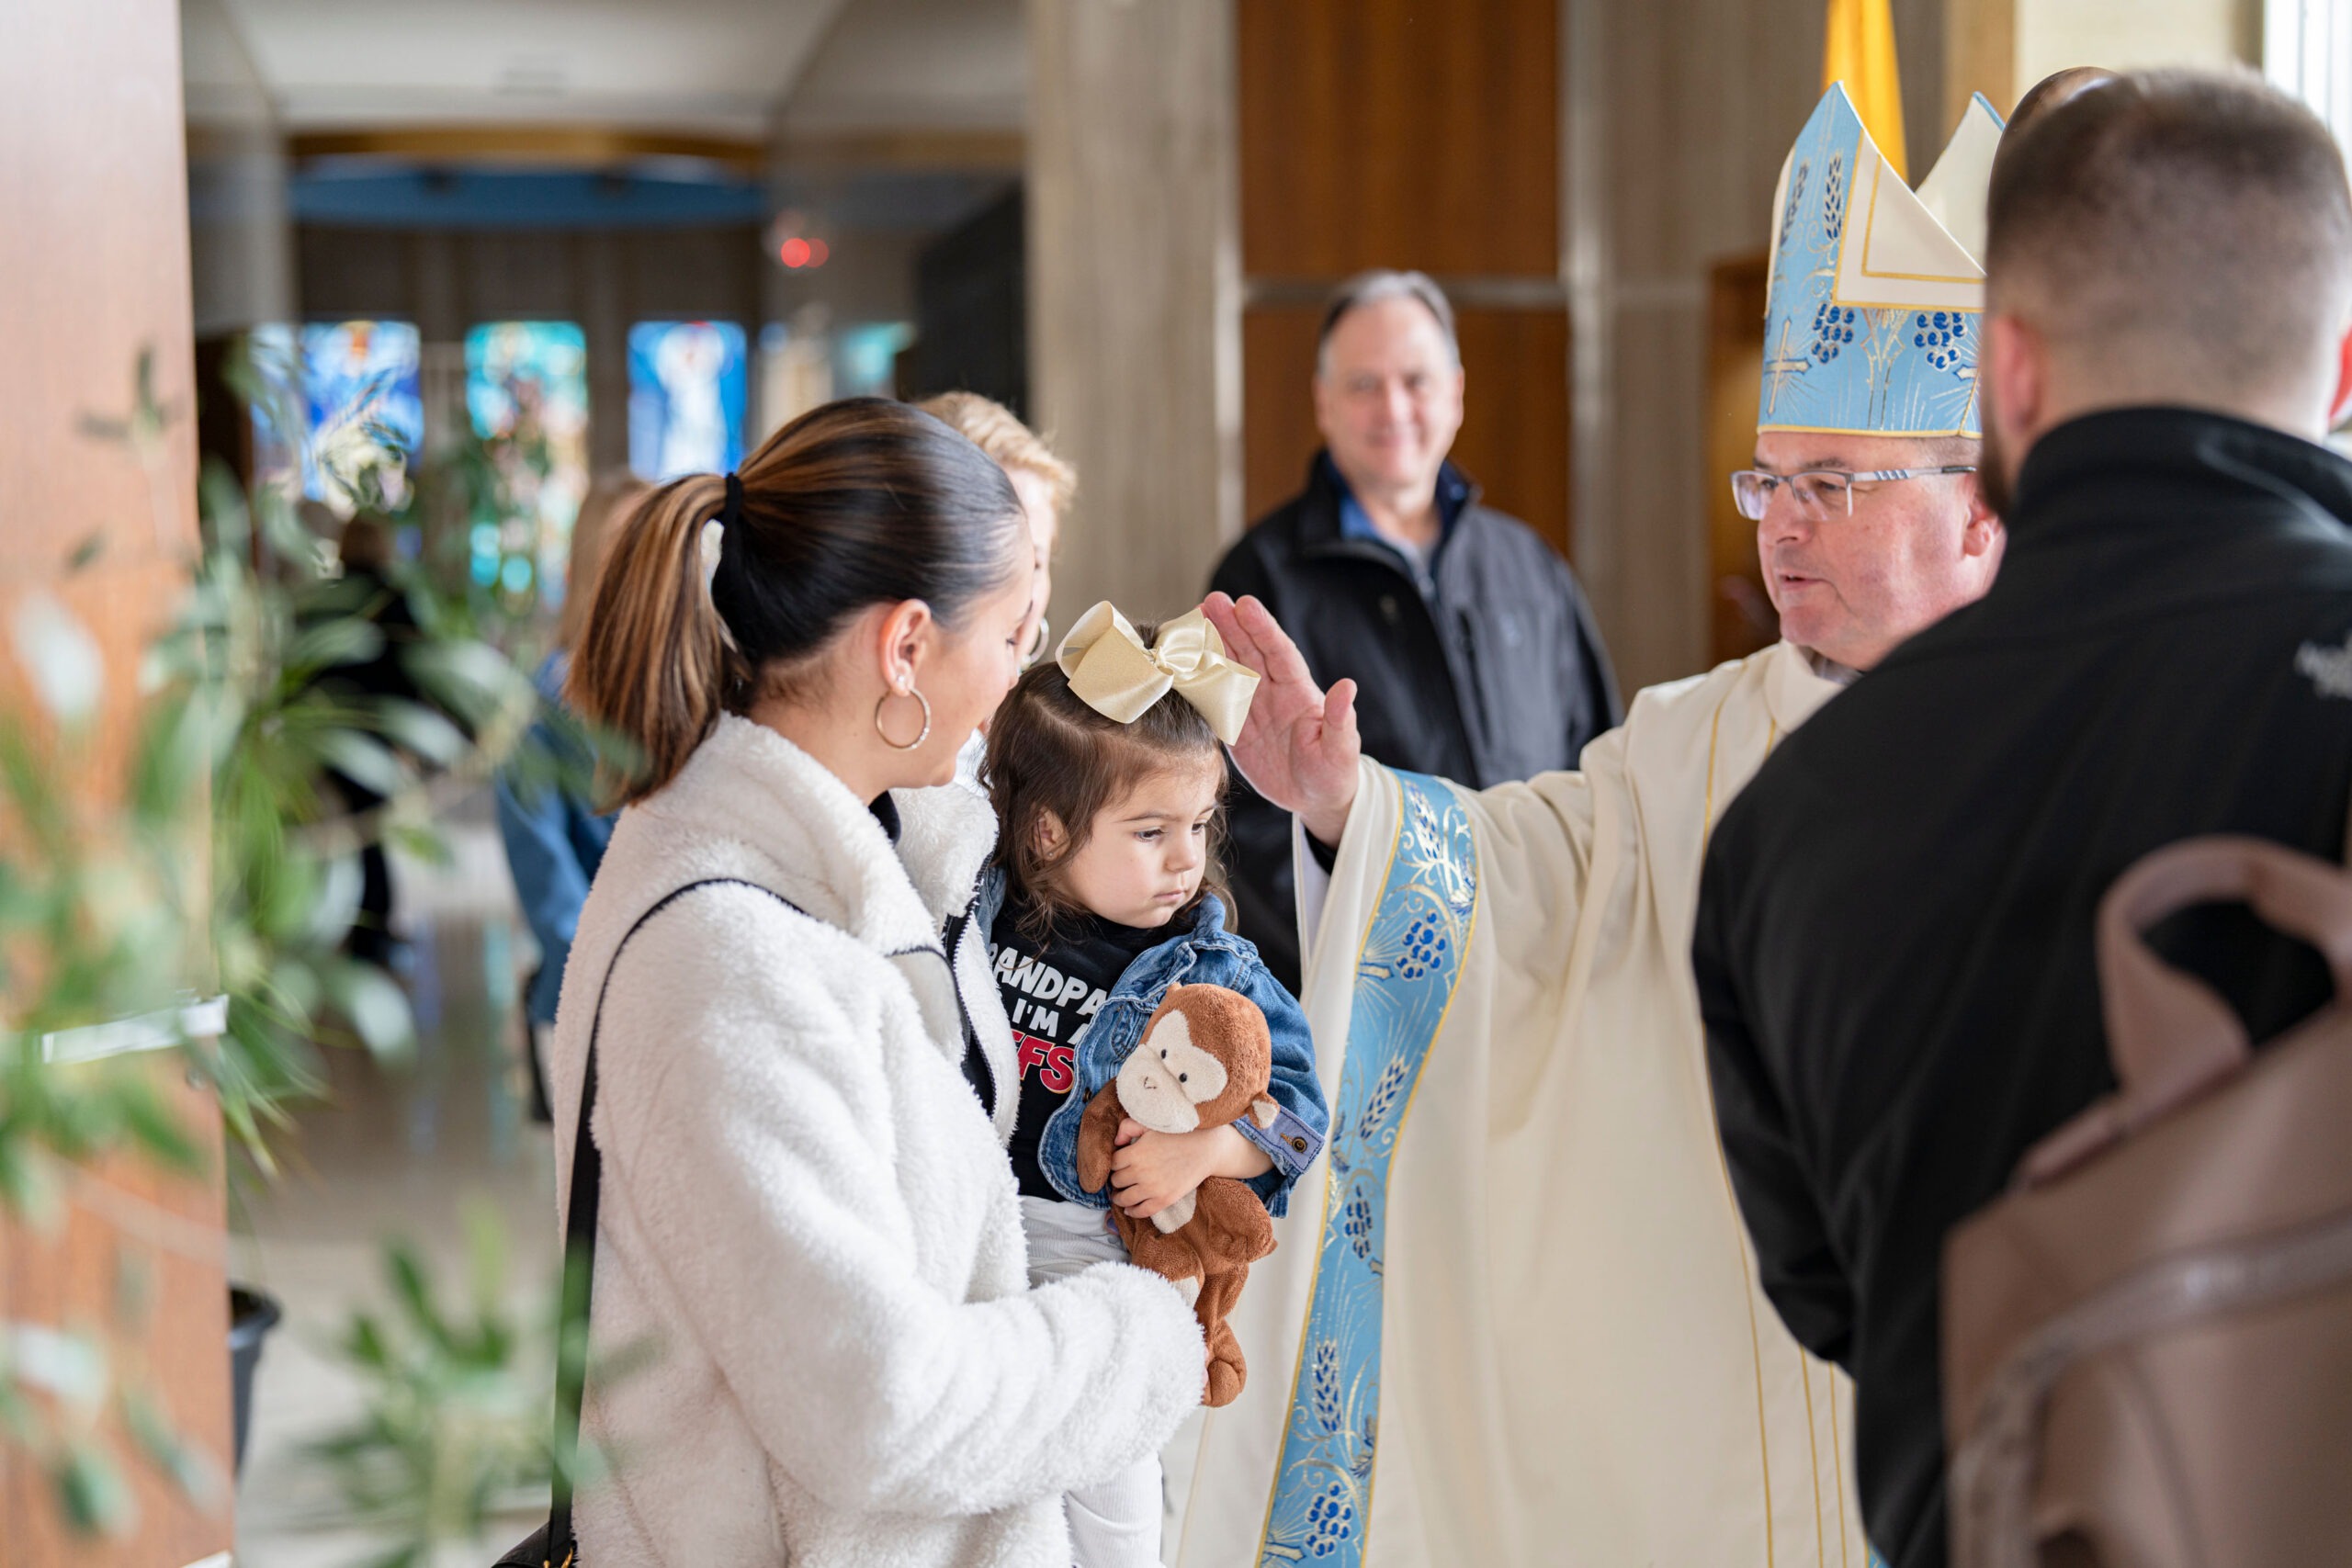 Bishop Bonnar blesses young child at the end of the White Mass. Photo by Brian Keith.